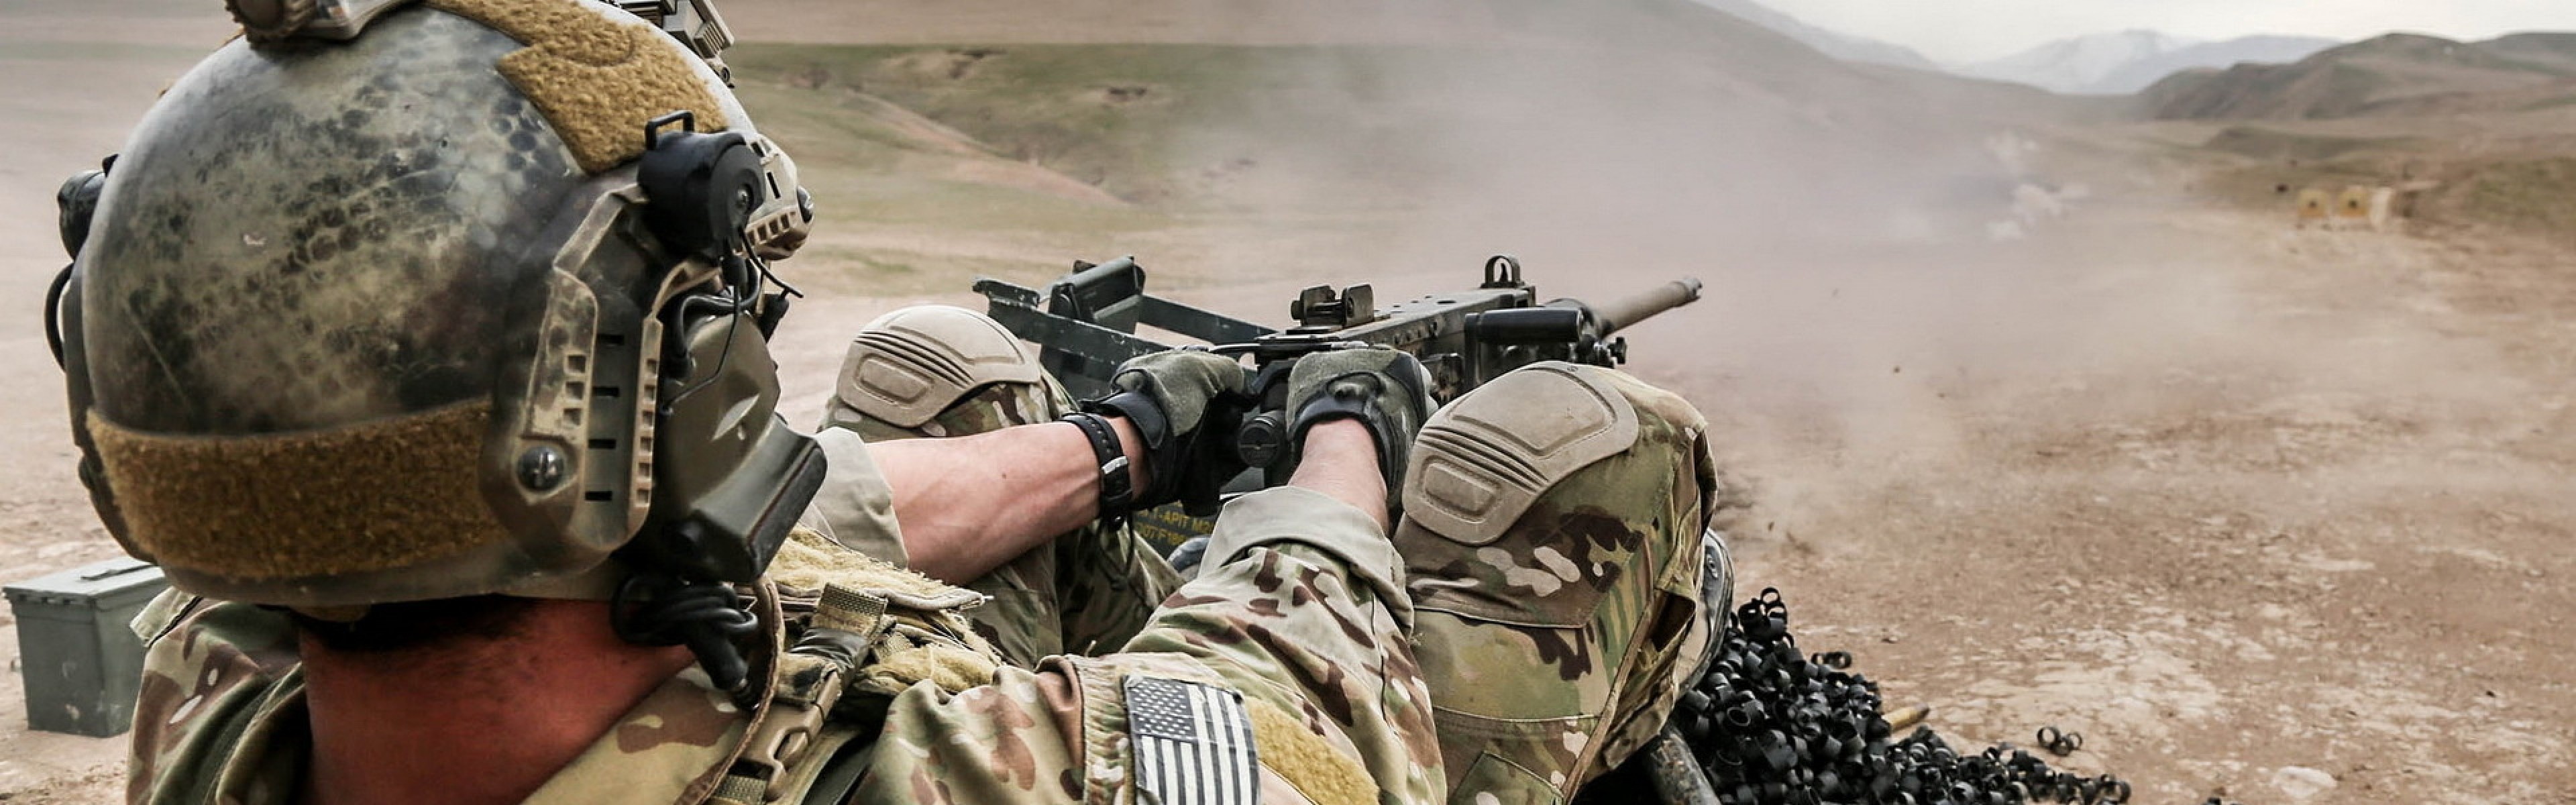 3840x1200  Wallpaper machine gun, us, special forces, afghanistan